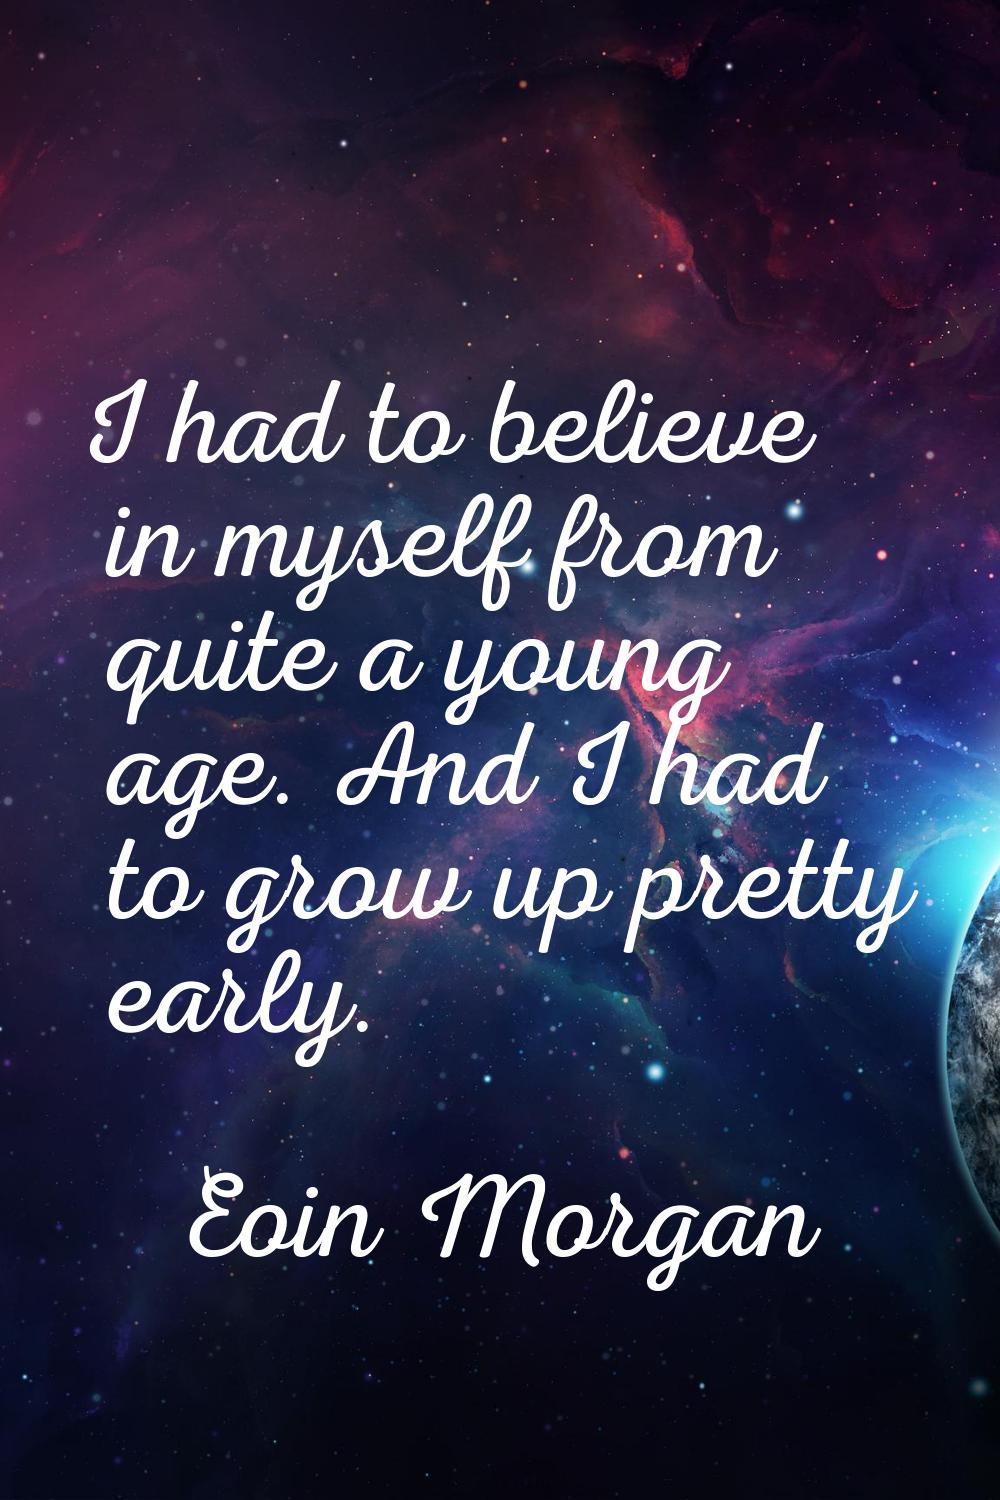 I had to believe in myself from quite a young age. And I had to grow up pretty early.